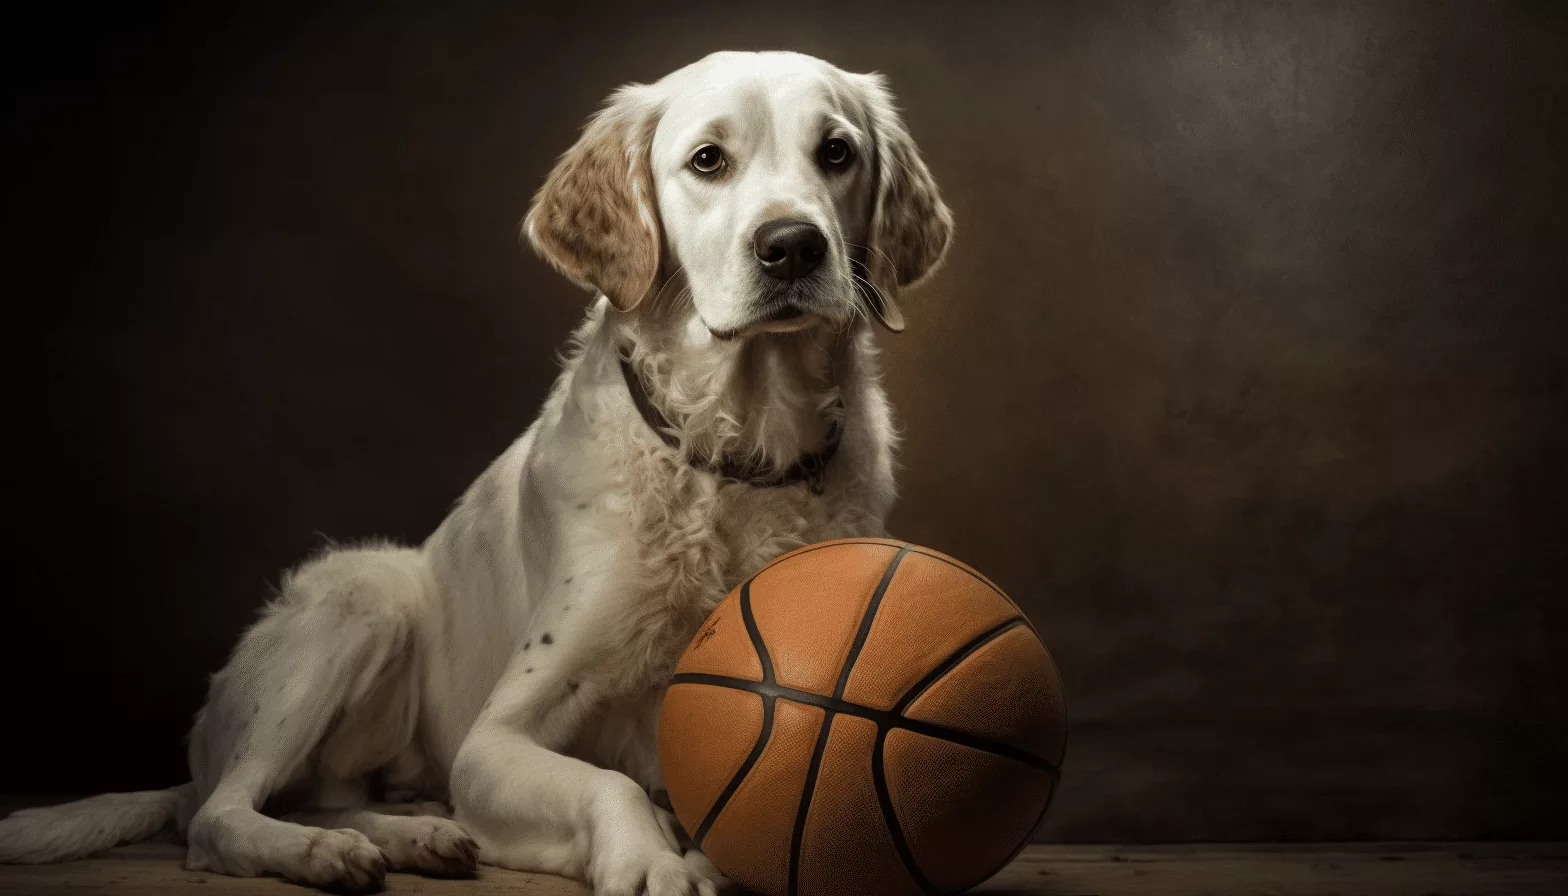 A dog is sitting next to a basketball.